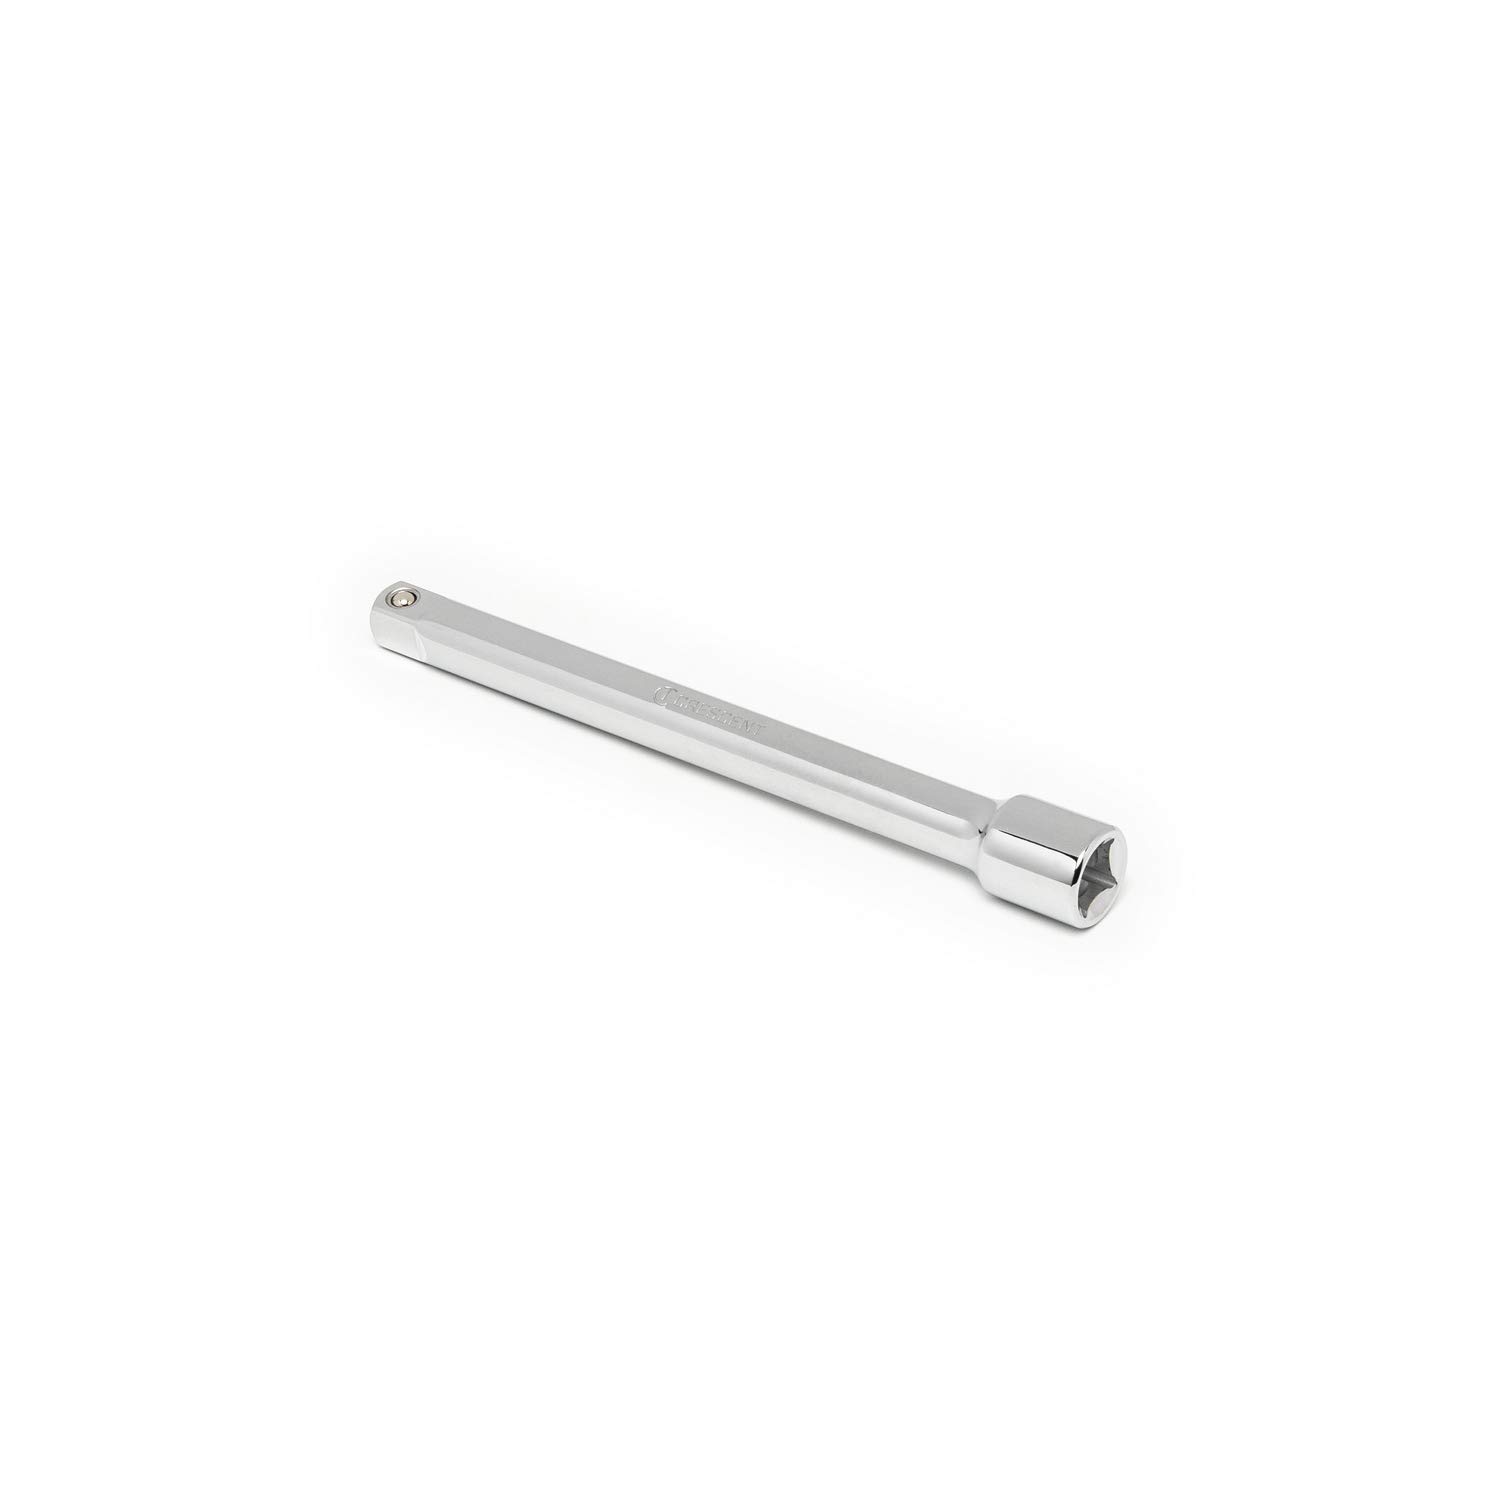 CDTA9C 3/8DR 6 IN. ExTENSION